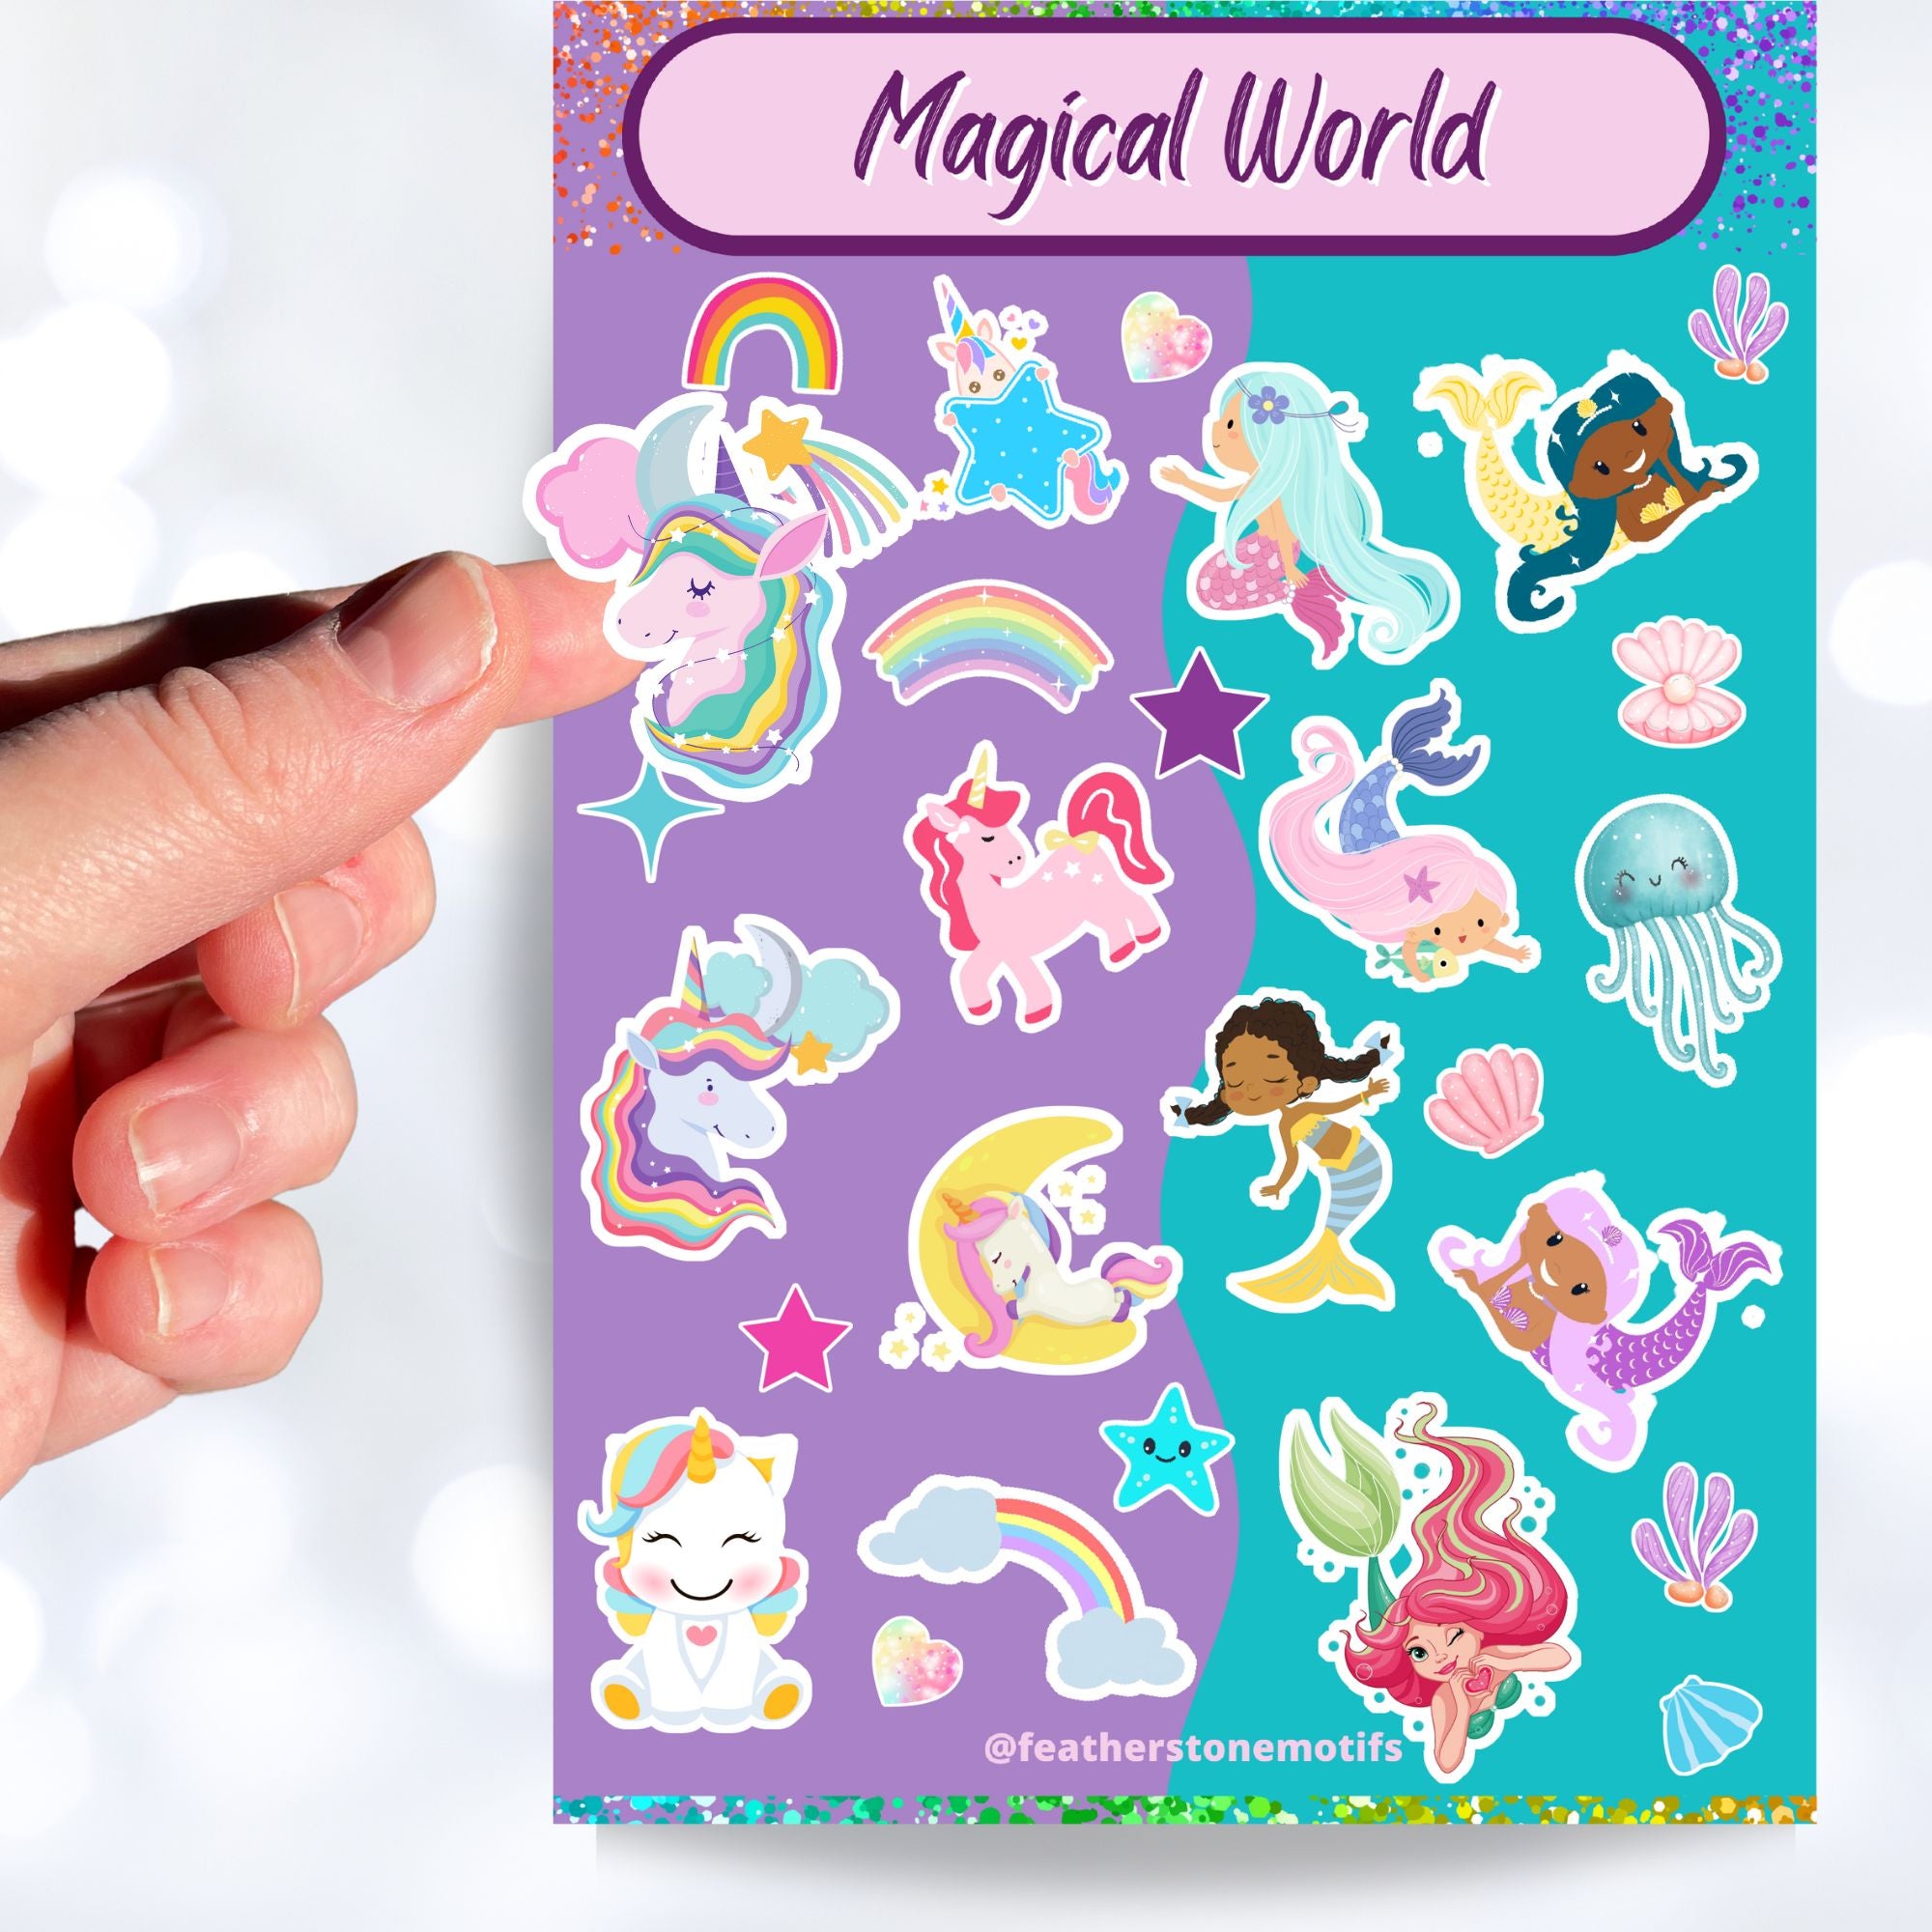 Mermaids, rainbows, and unicorns; it's our Magical World sparkle sticker sheet! This sticker sheet is filled with fun and cute magical images, and it has a sparkle overlay so it glitters in the light! This image is of a hand holding a unicorn sticker above the sticker sheet.